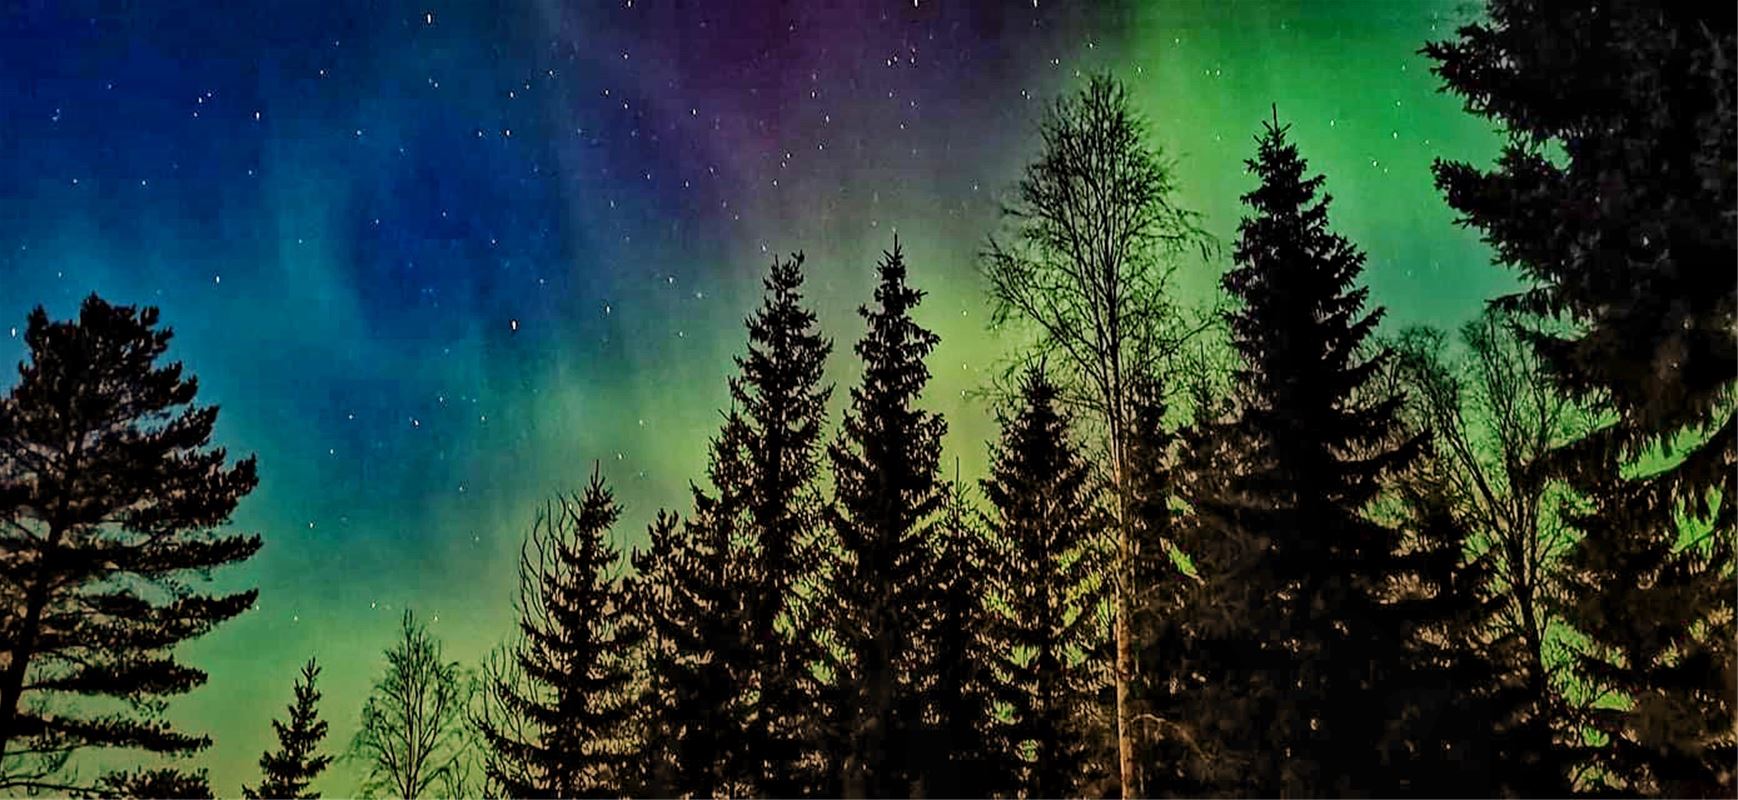 Northern lights over the forest.